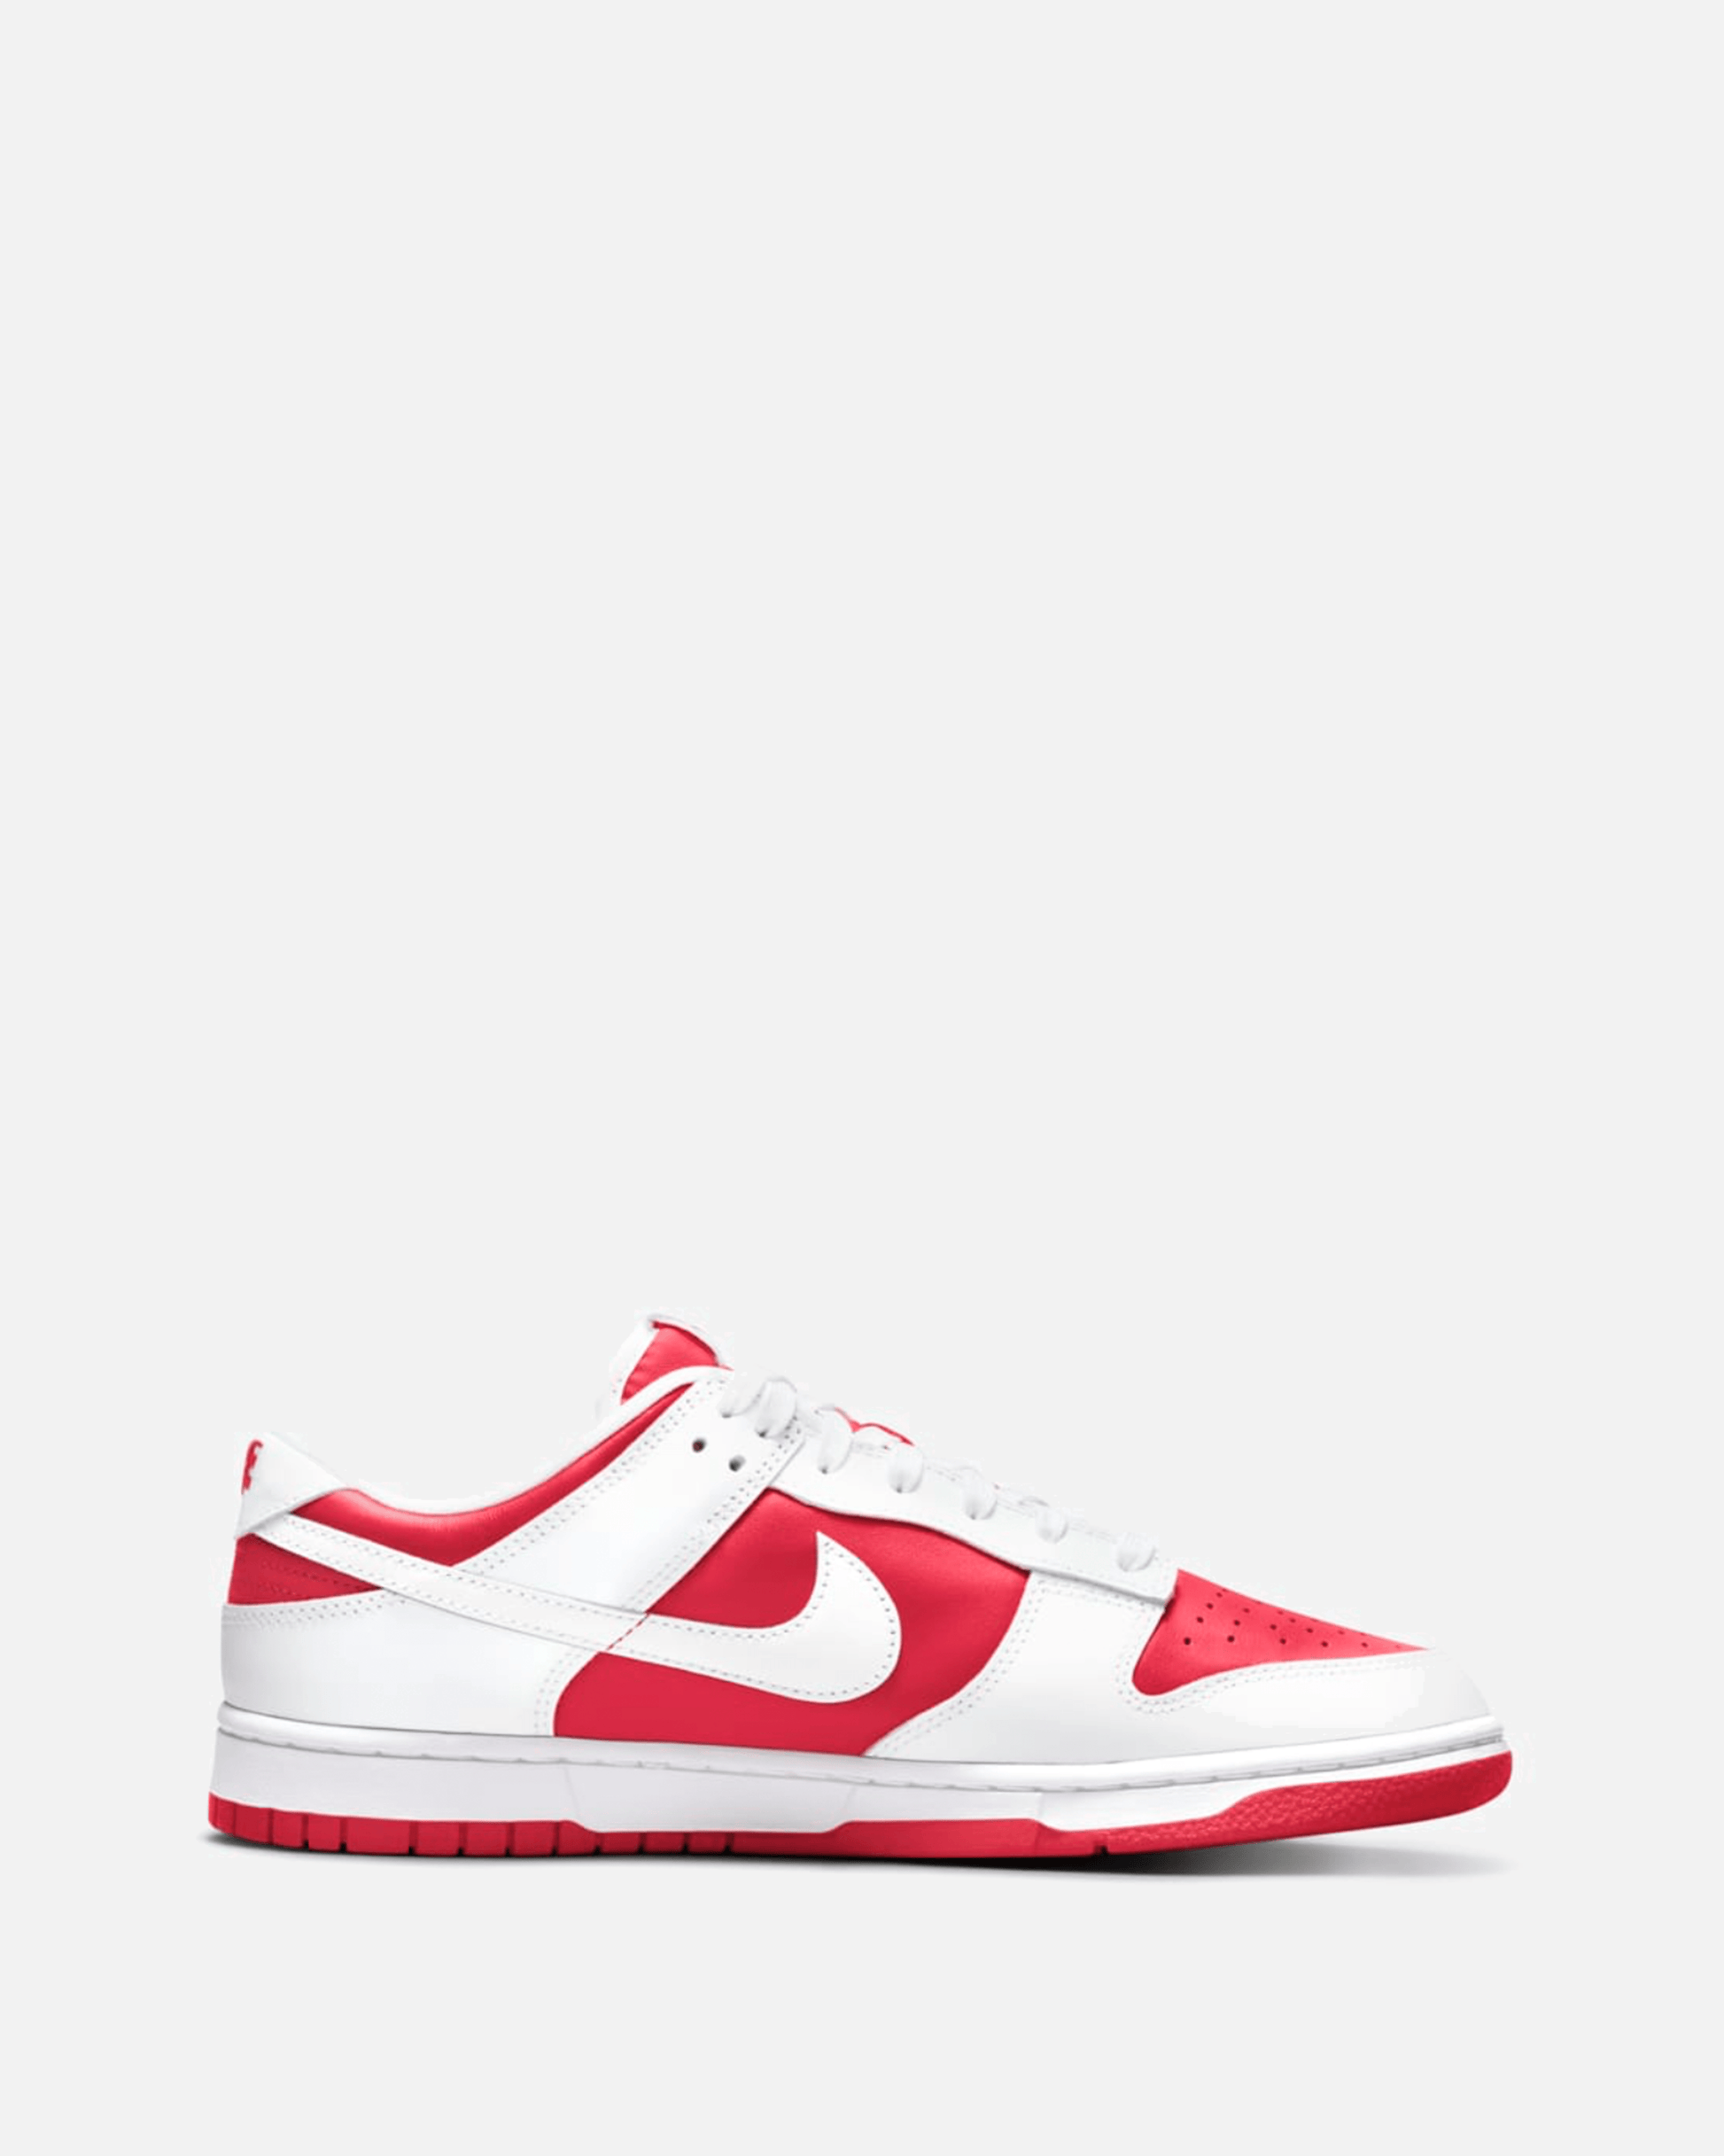 Nike Releases Dunk Low 'Championship Red'